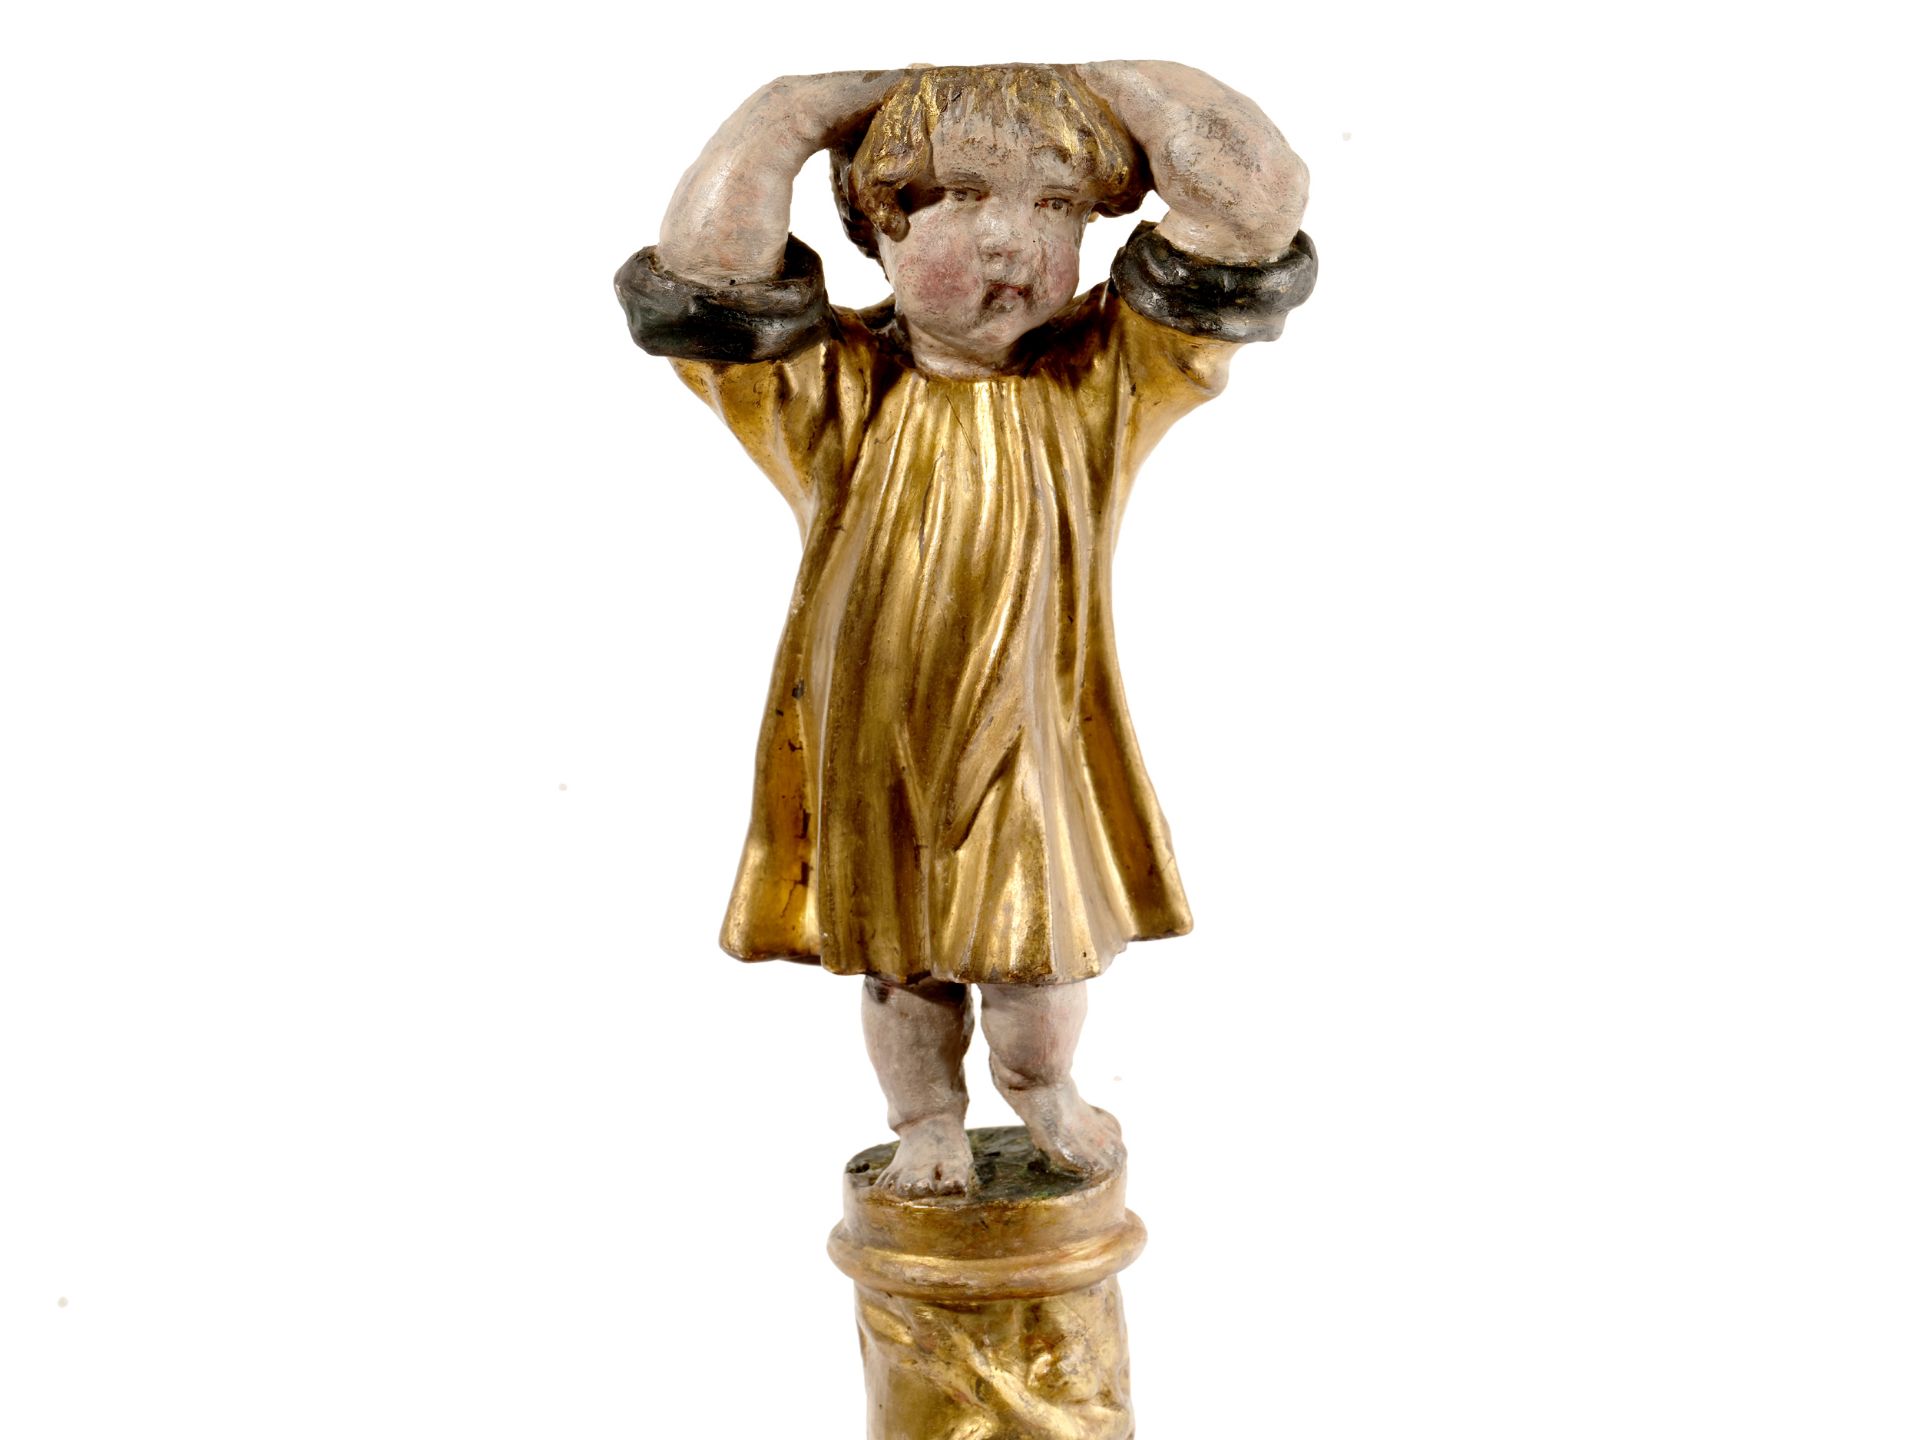 Christ child standing on a column, 
Southern Europe, Spain/Italy, 
17th century - Image 6 of 7